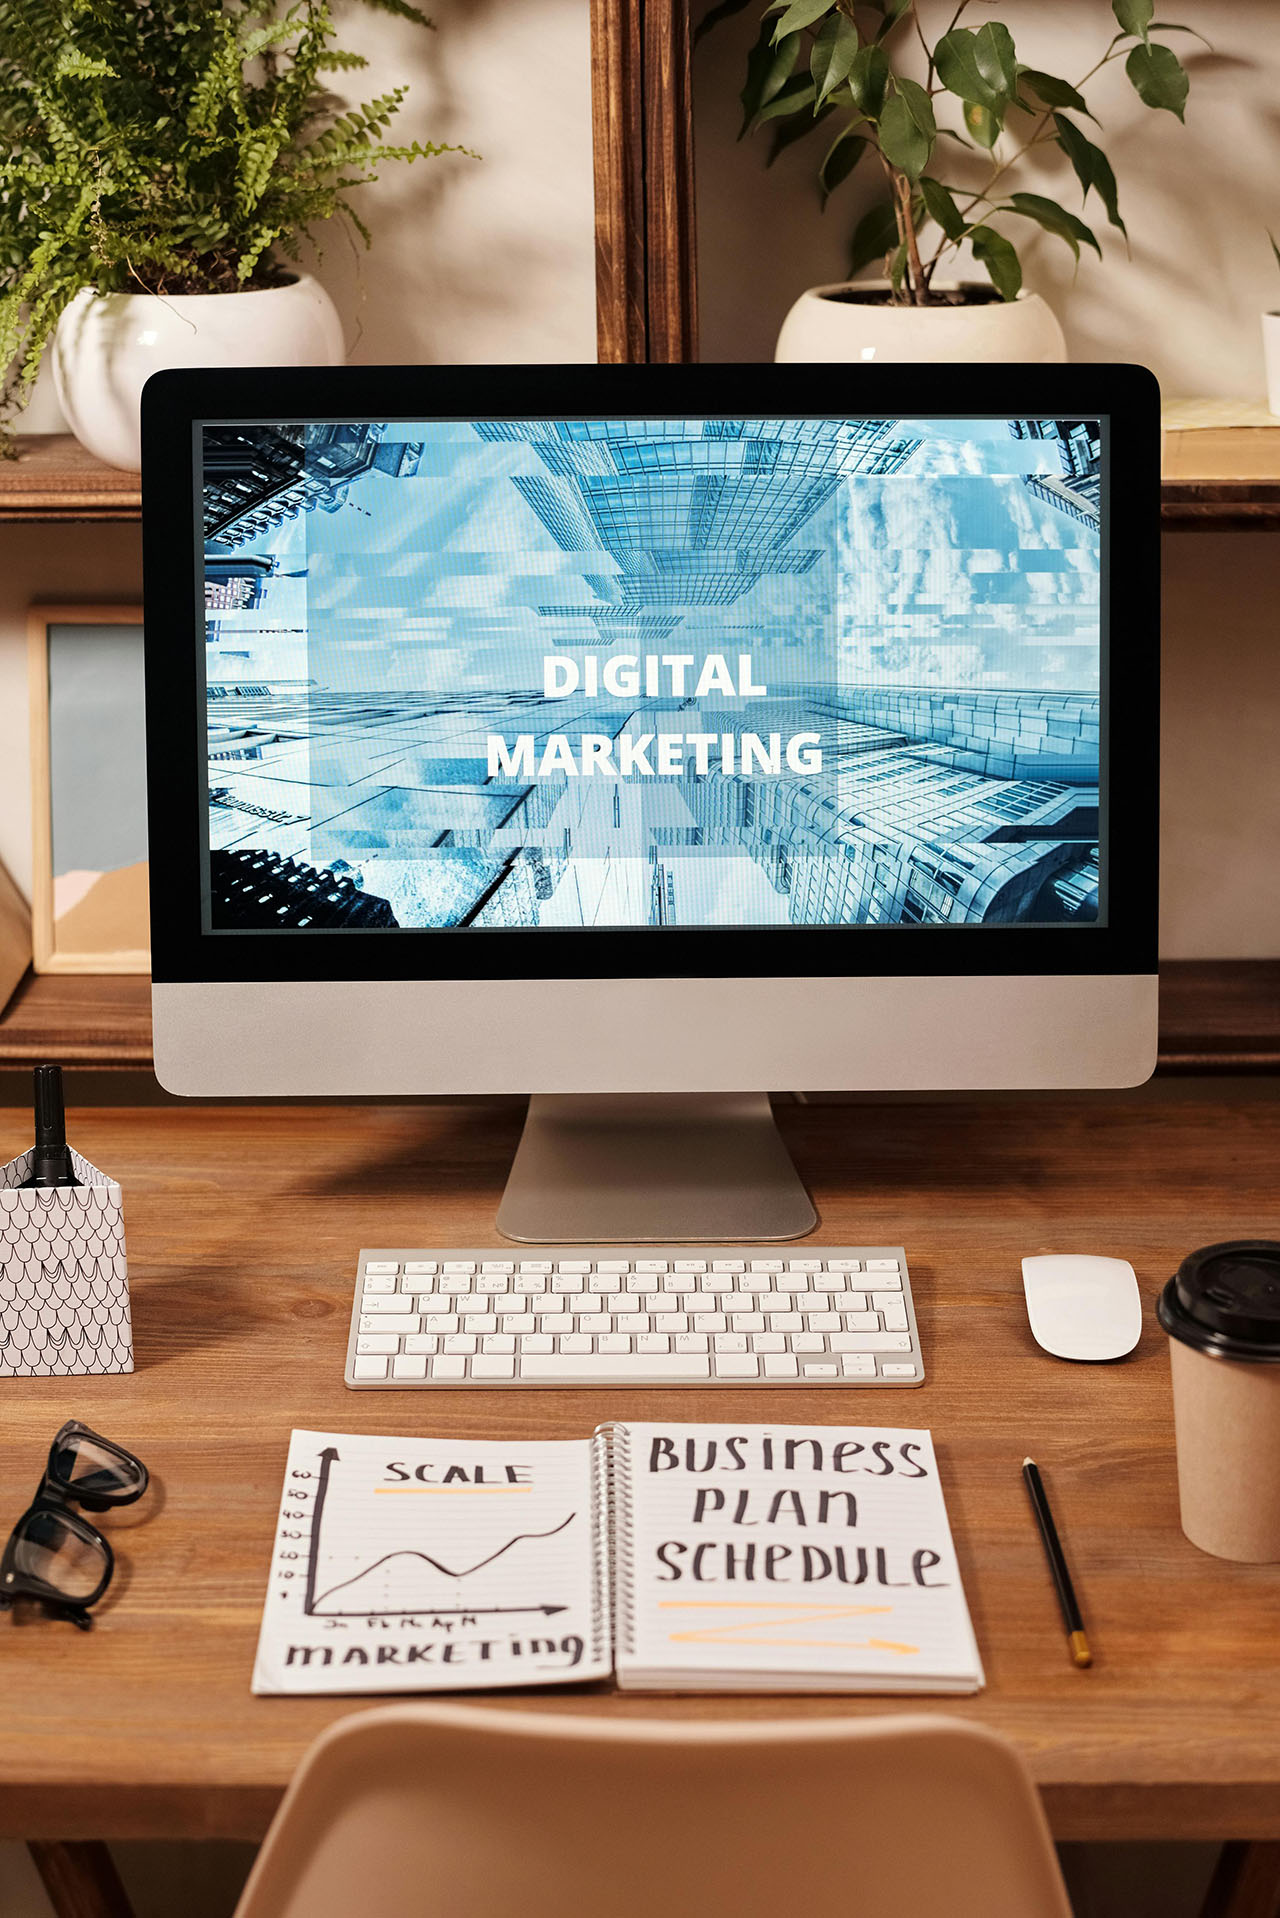 Laptop on a desk with the words "Digital Marketing" on the screen